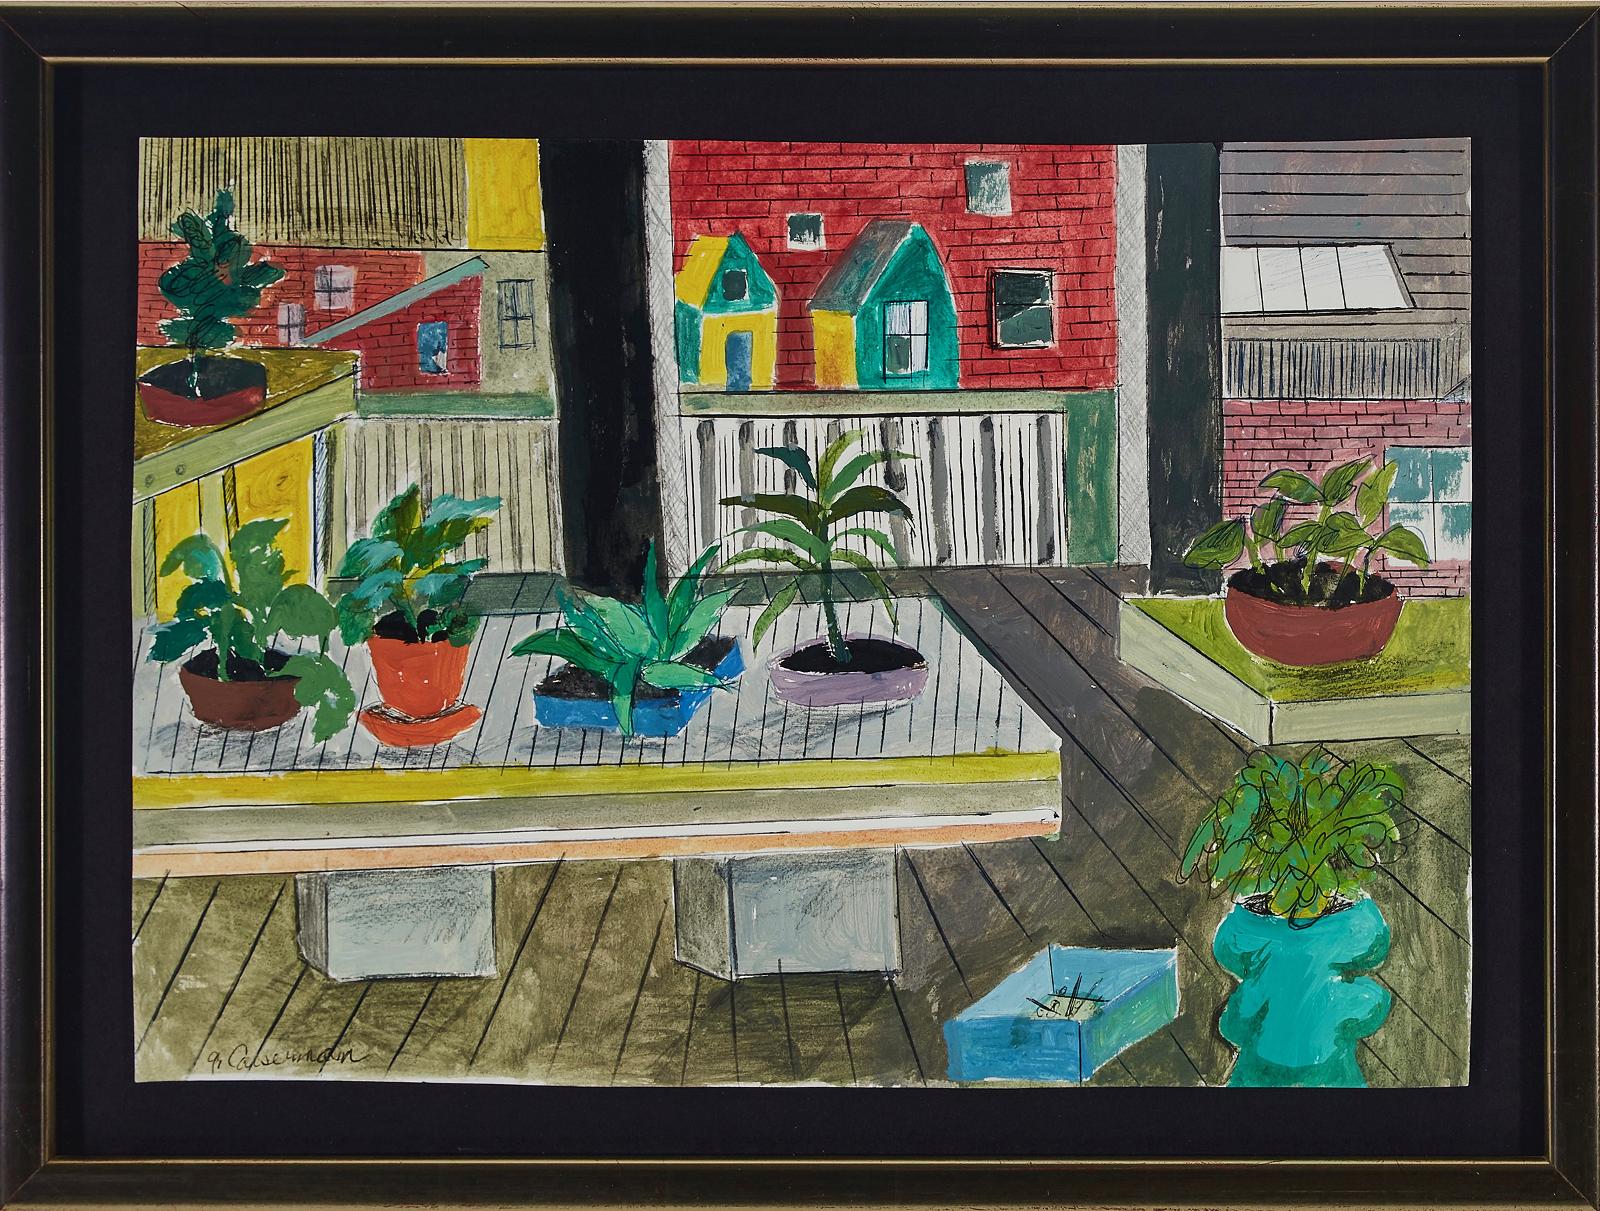 Ghitta Caiserman-Roth (1923-2005) - Untitled (Window View With Flower Pots)